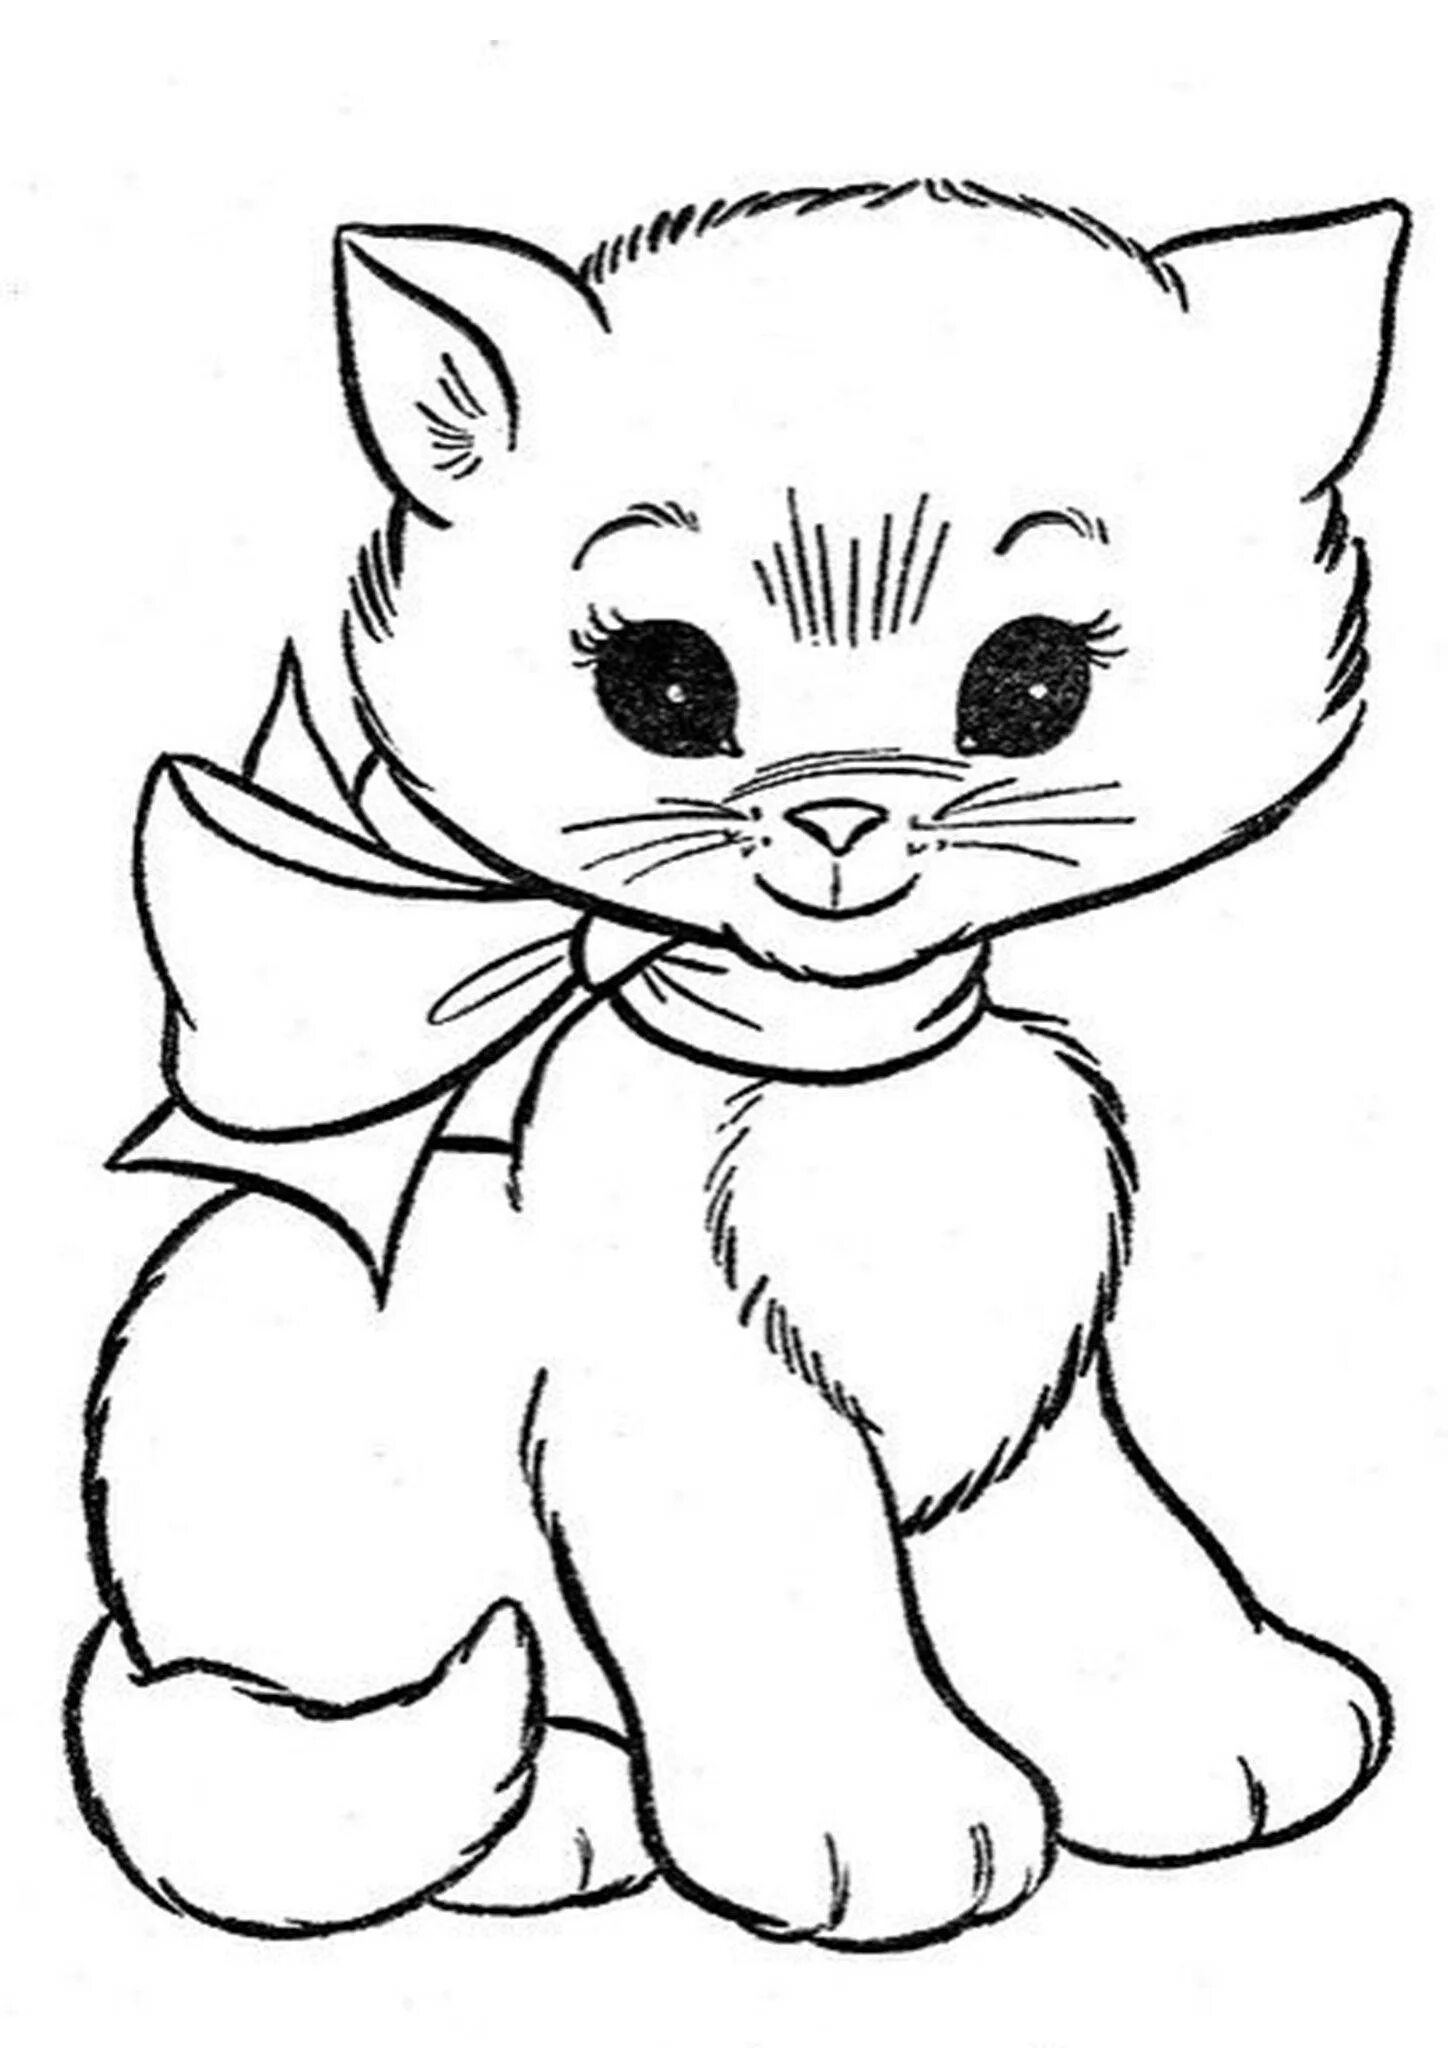 Giggly cat and dog coloring pages for kids